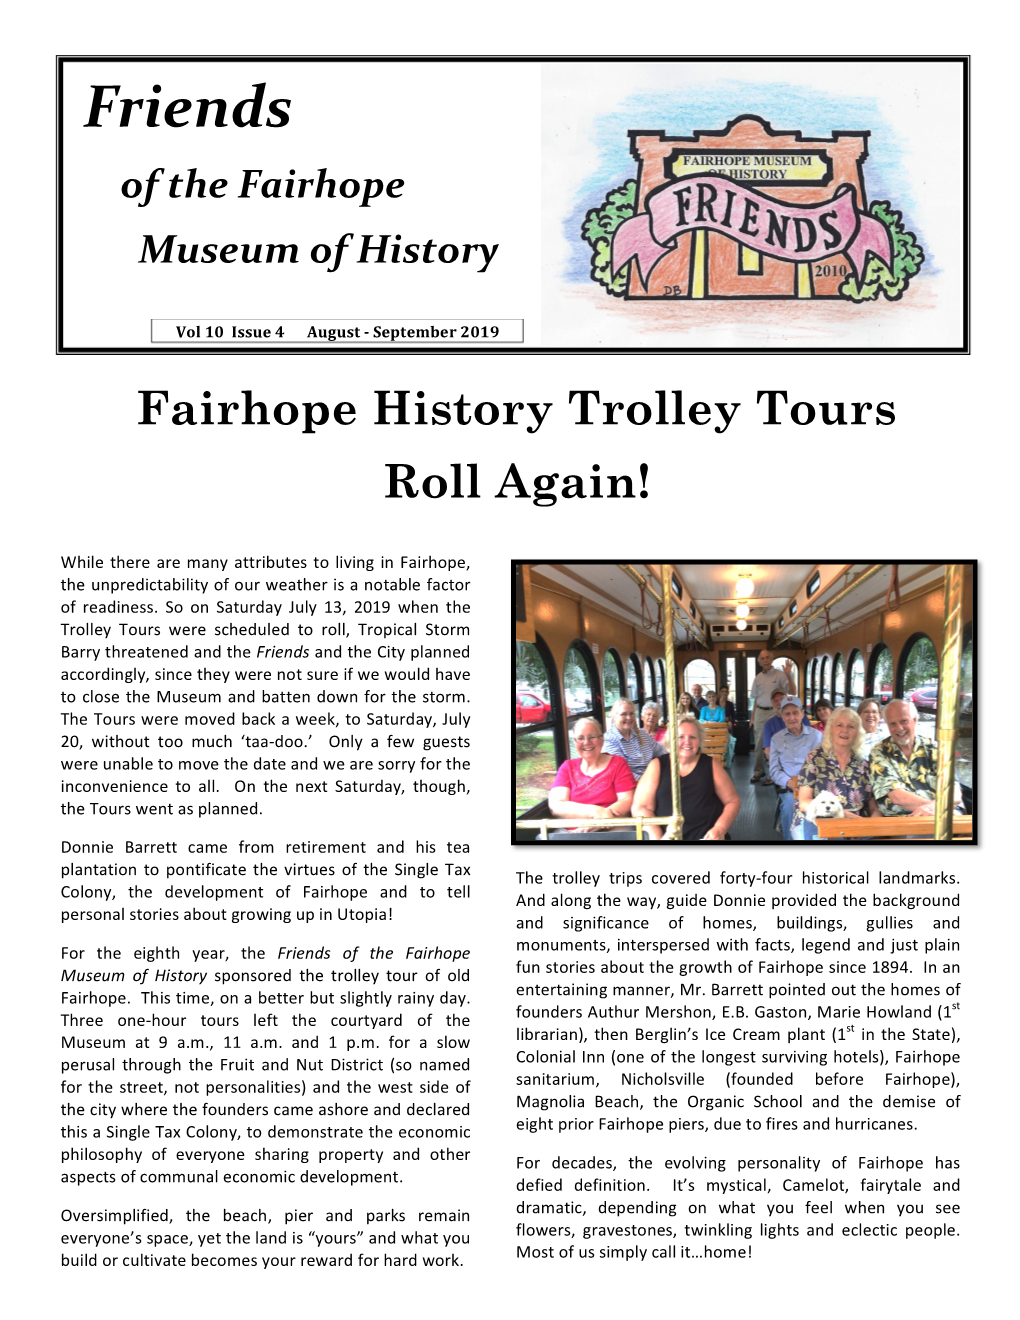 Friends of the Fairhope Museum of History